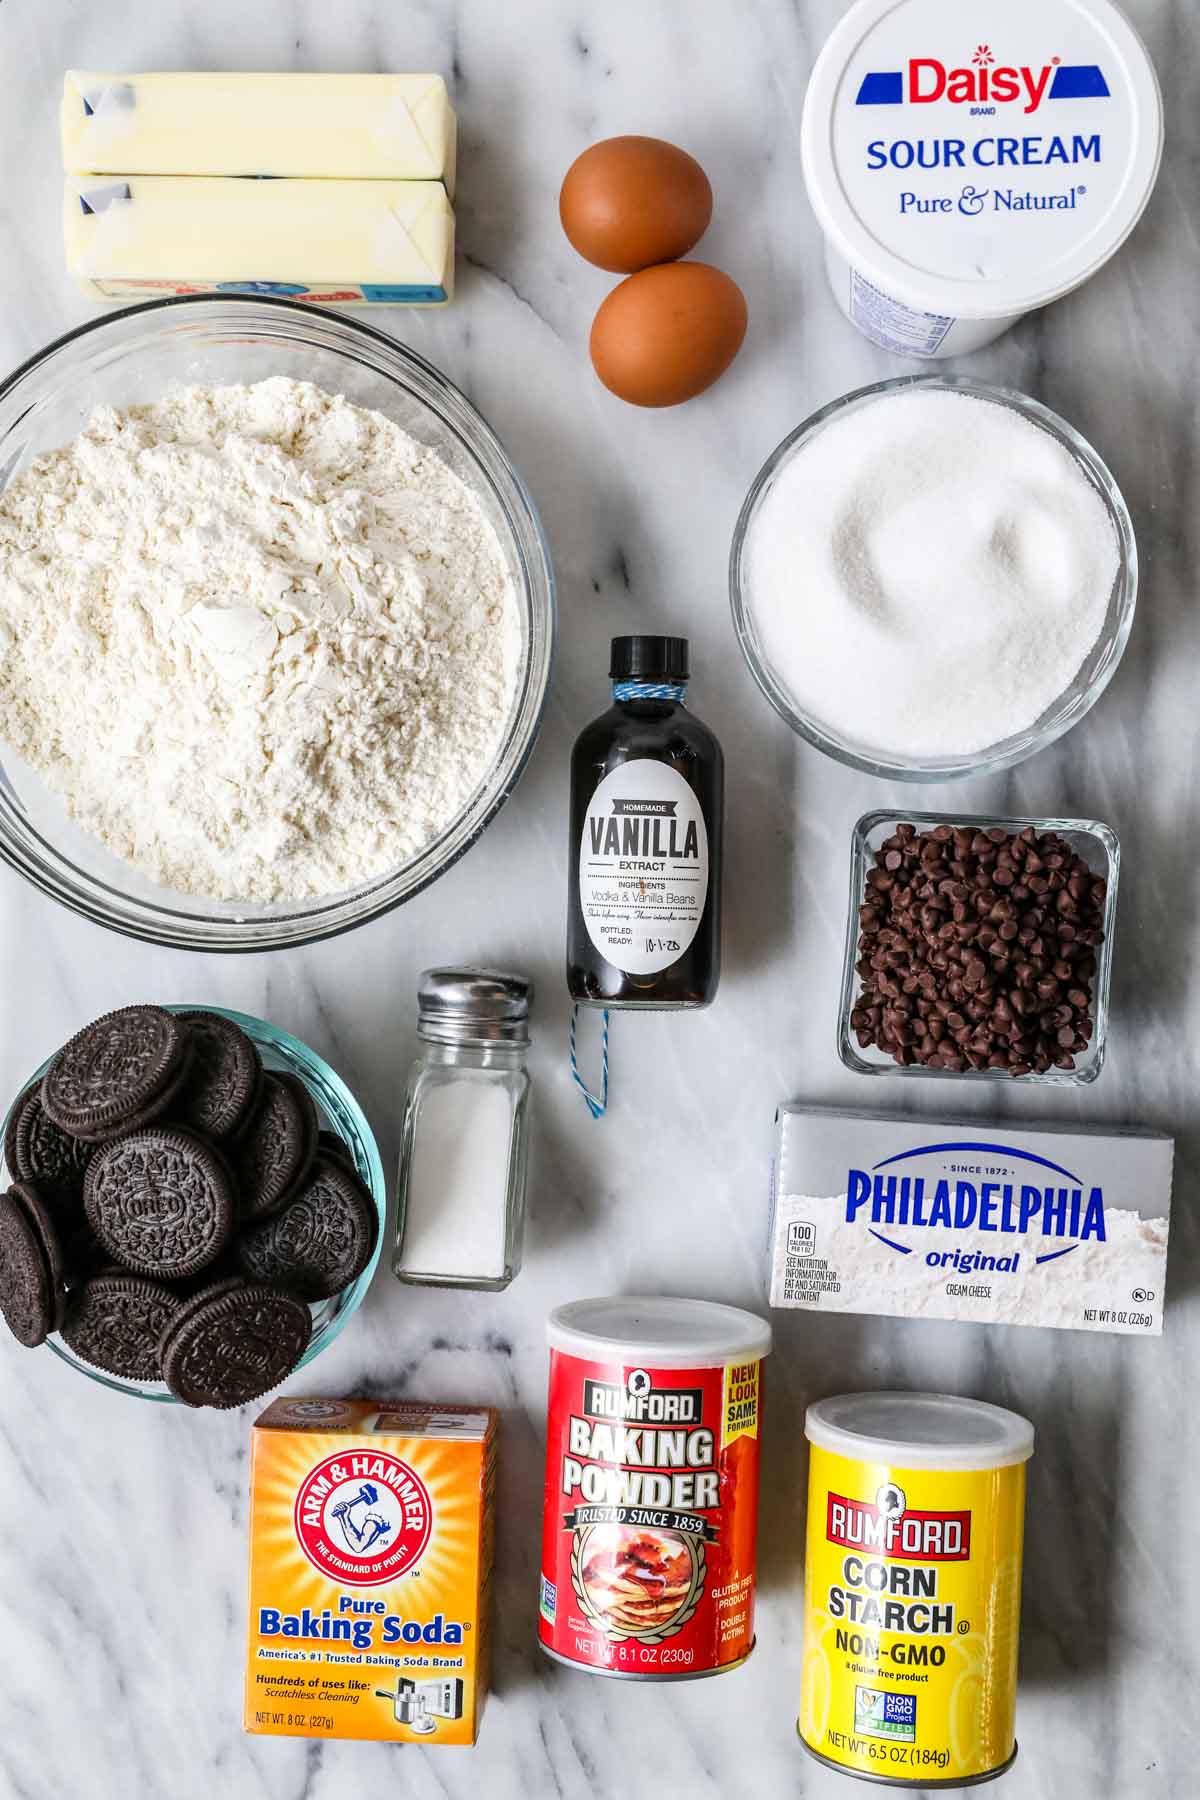 Overhead view of ingredients including cream cheese, Oreo cookies, sour cream, and more.